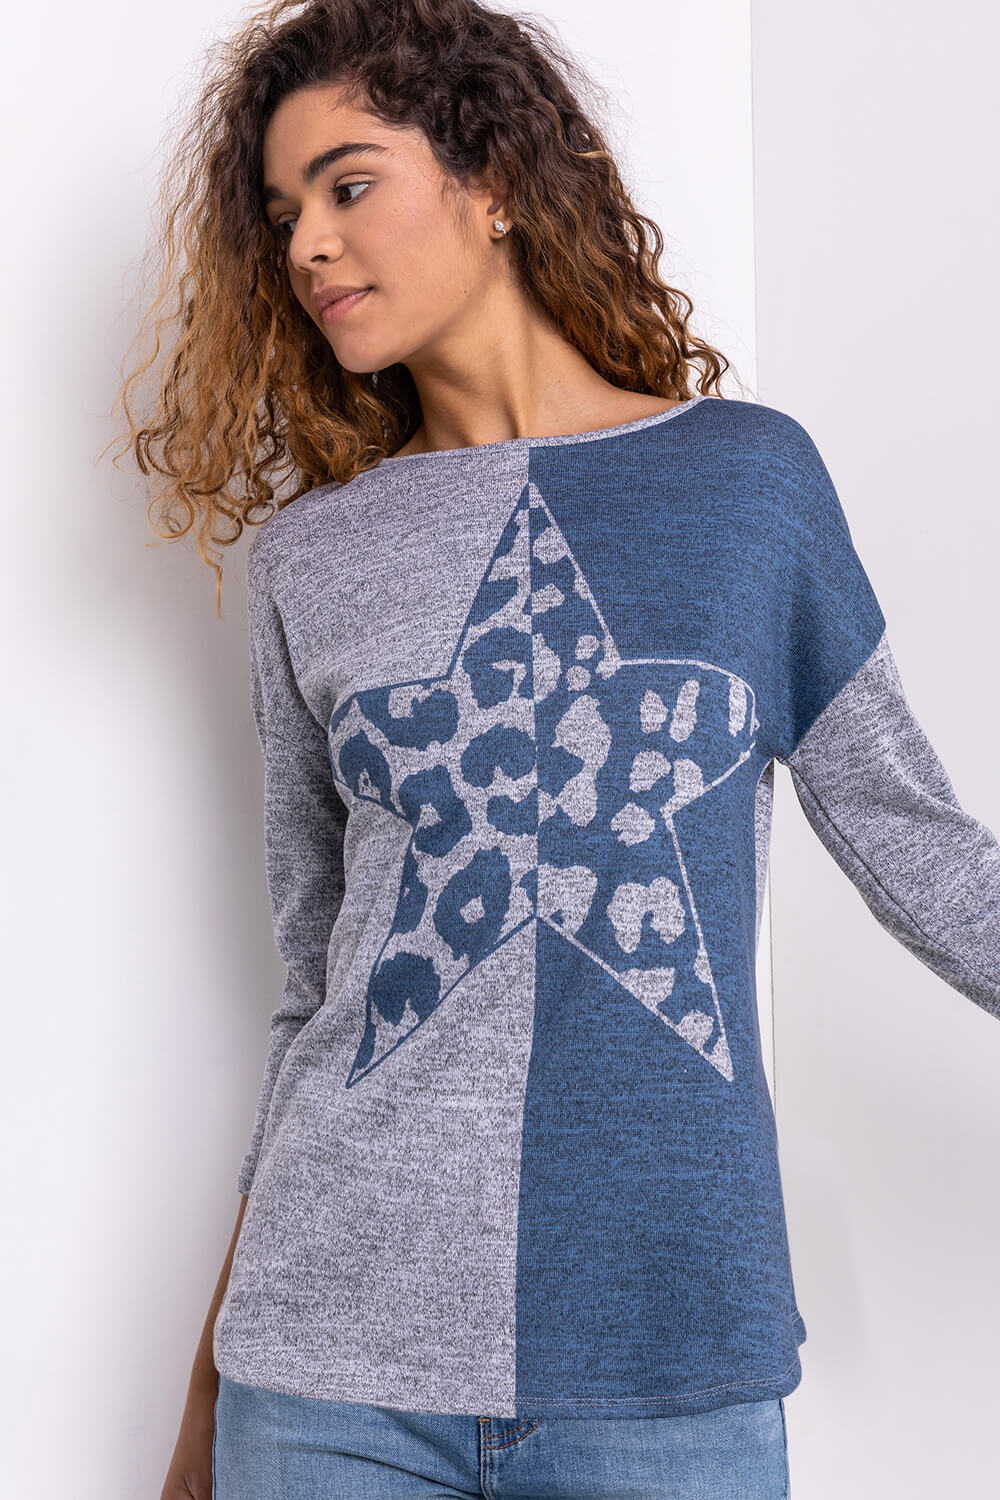 Blue Contrast Animal Print Soft Knit Jersey Top, Image 5 of 5